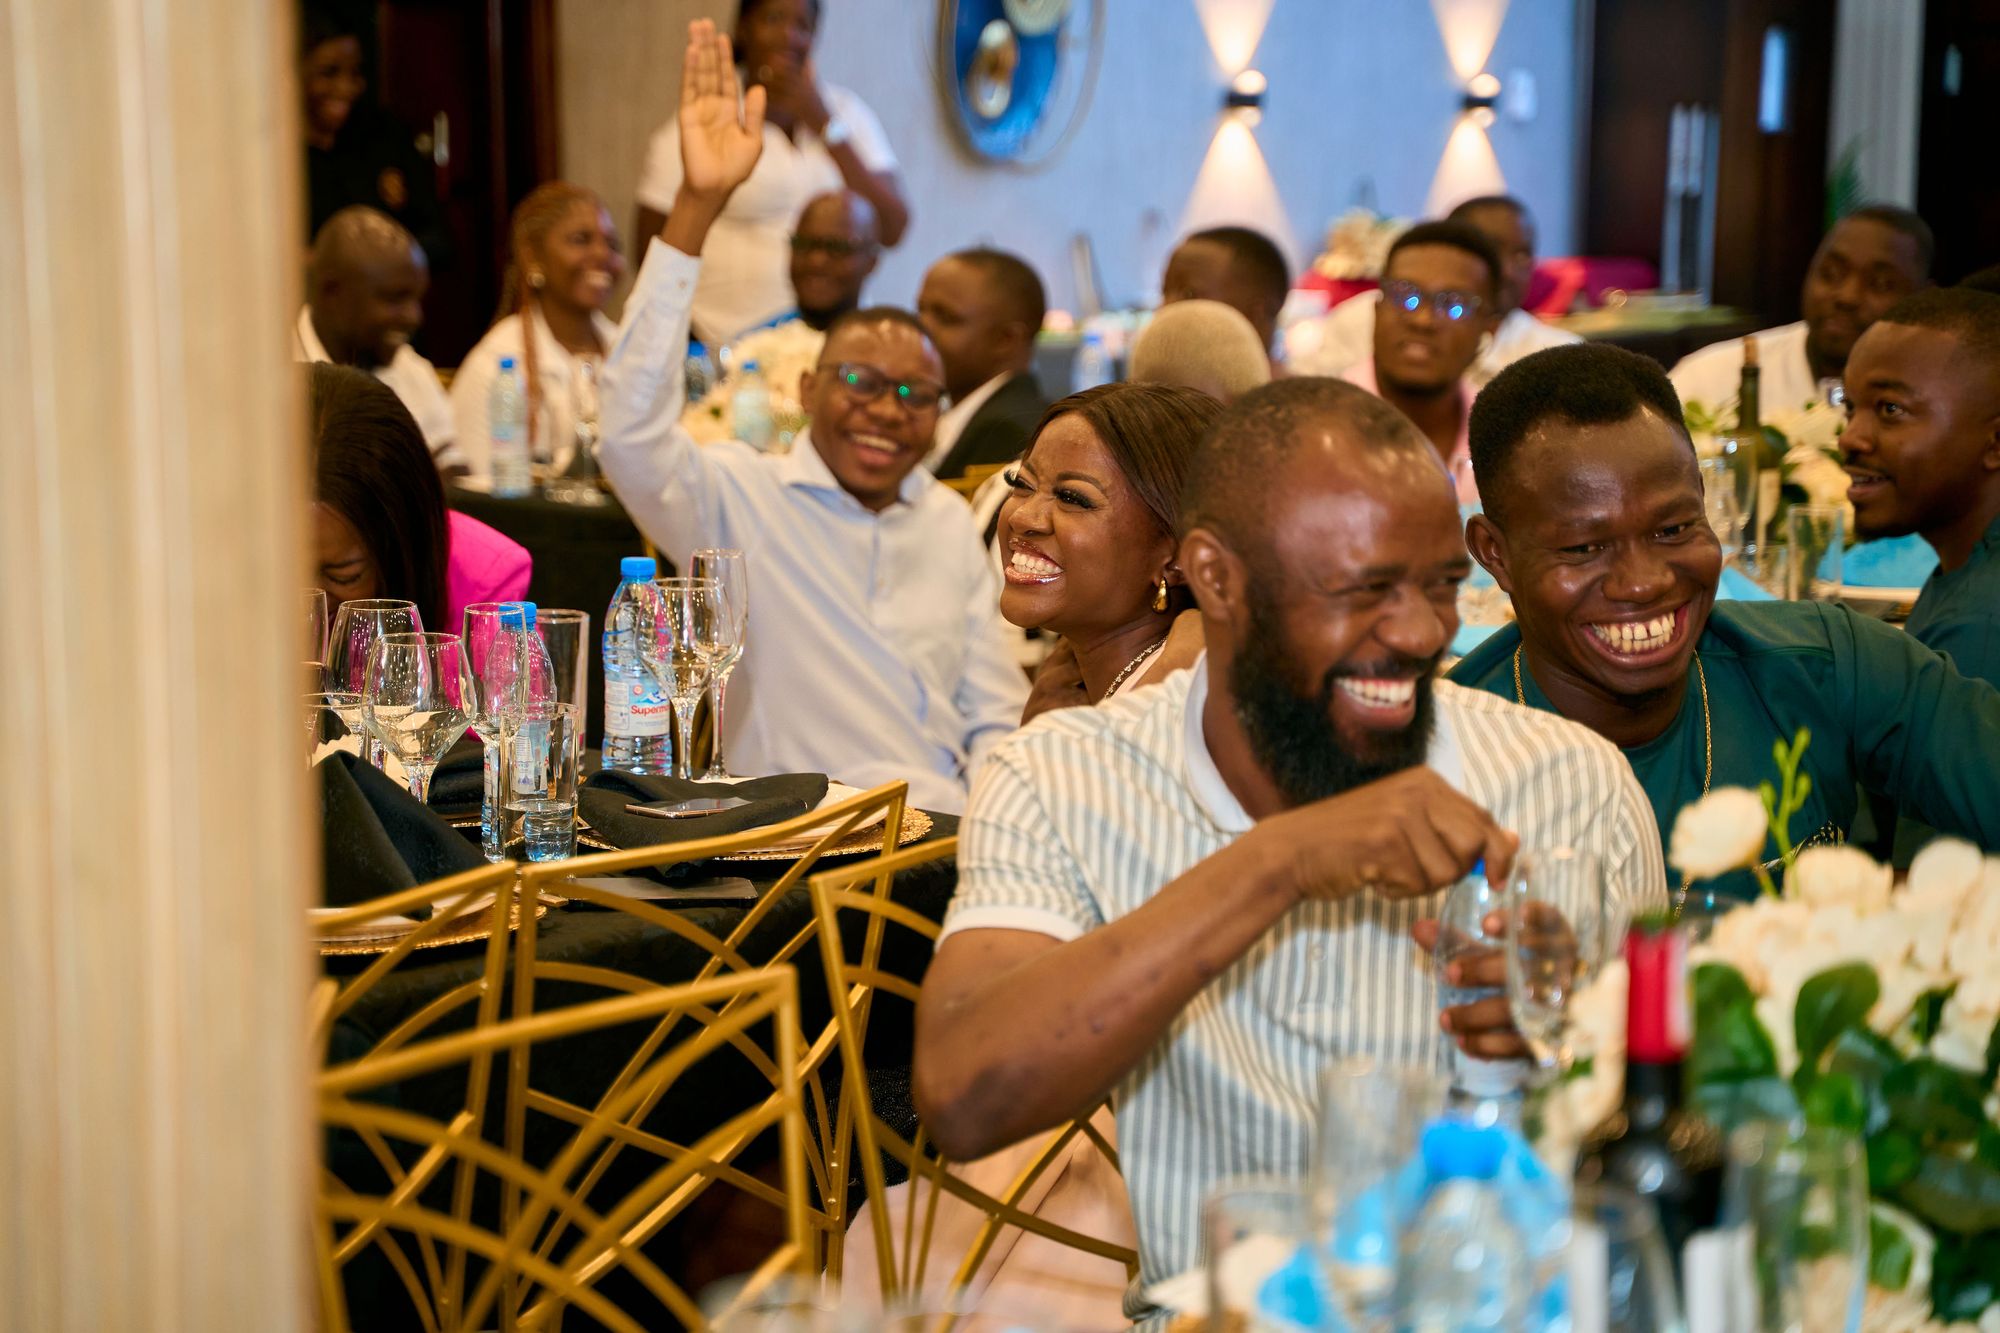 Obiex Central guests laughing at a joke 